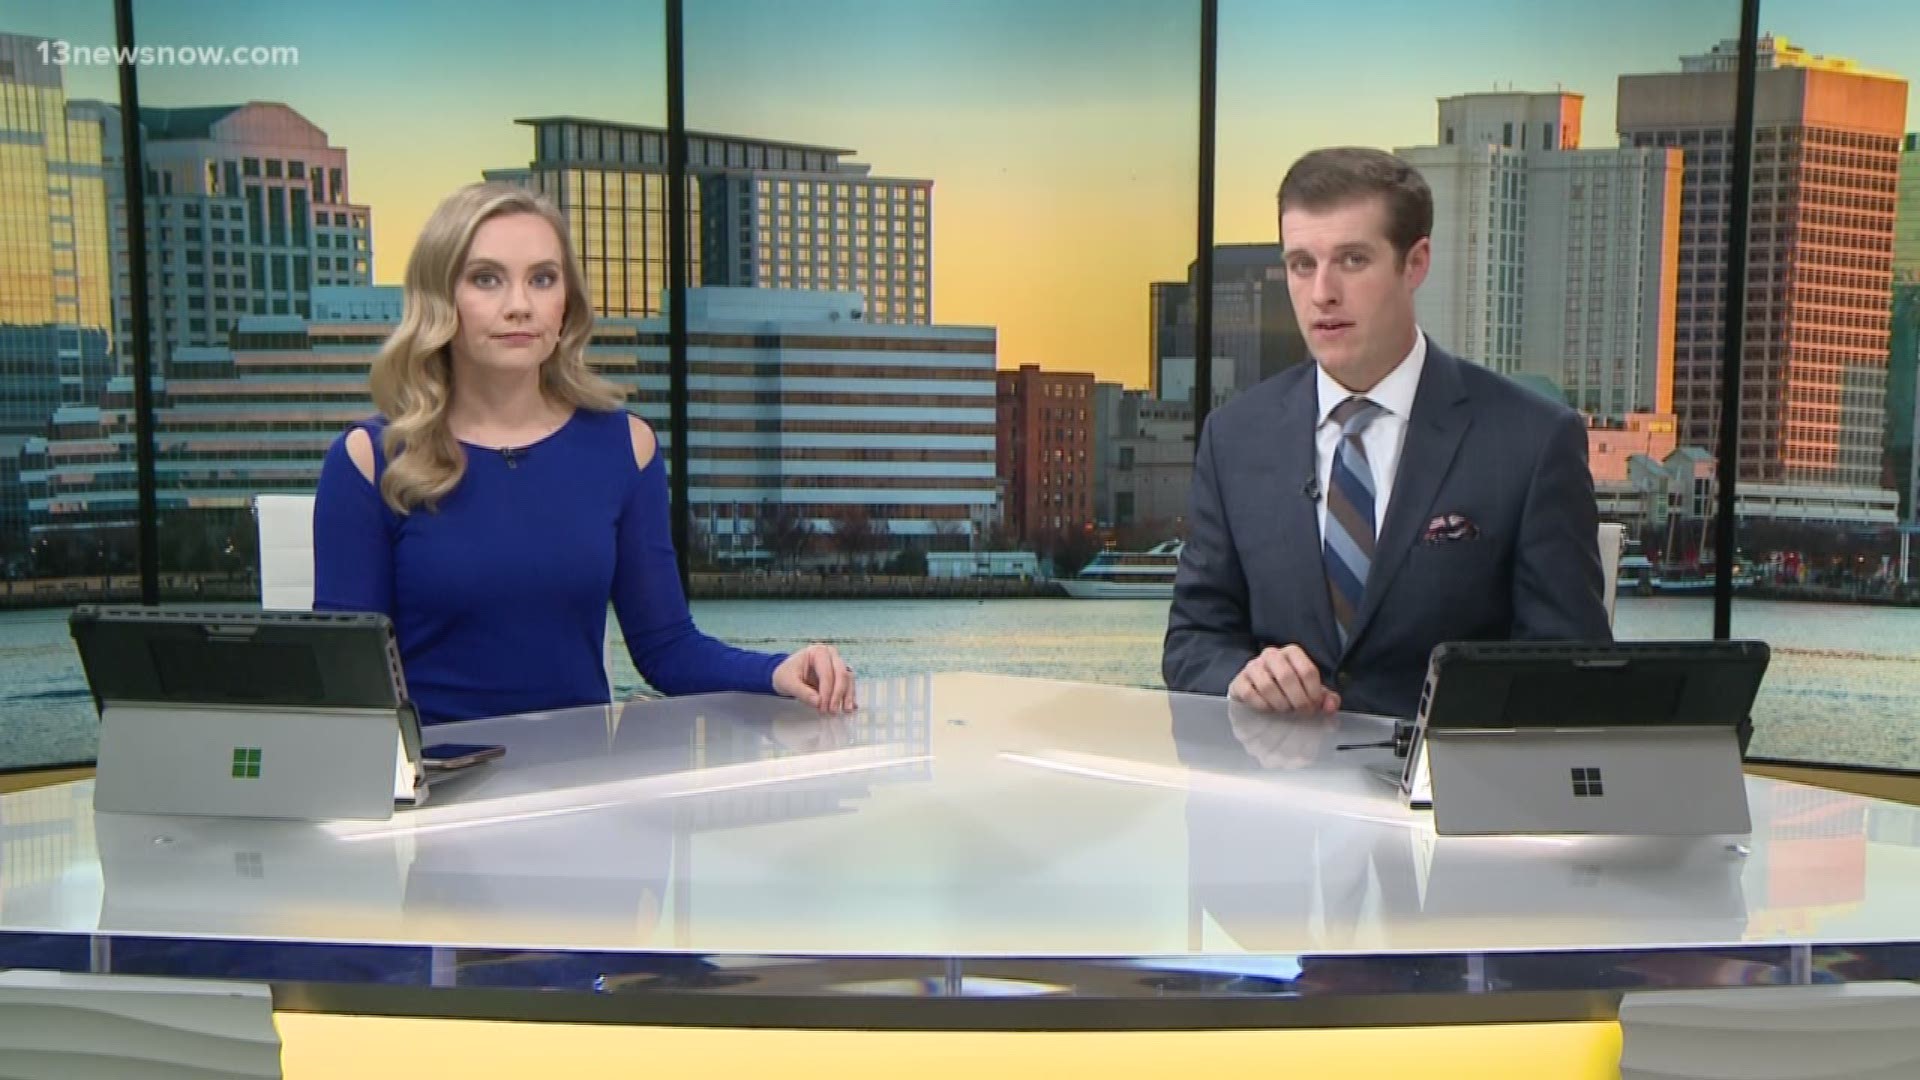 13News Now Top Headlines at Noon with Dan Kennedy and Kristina Robinson for December 12.